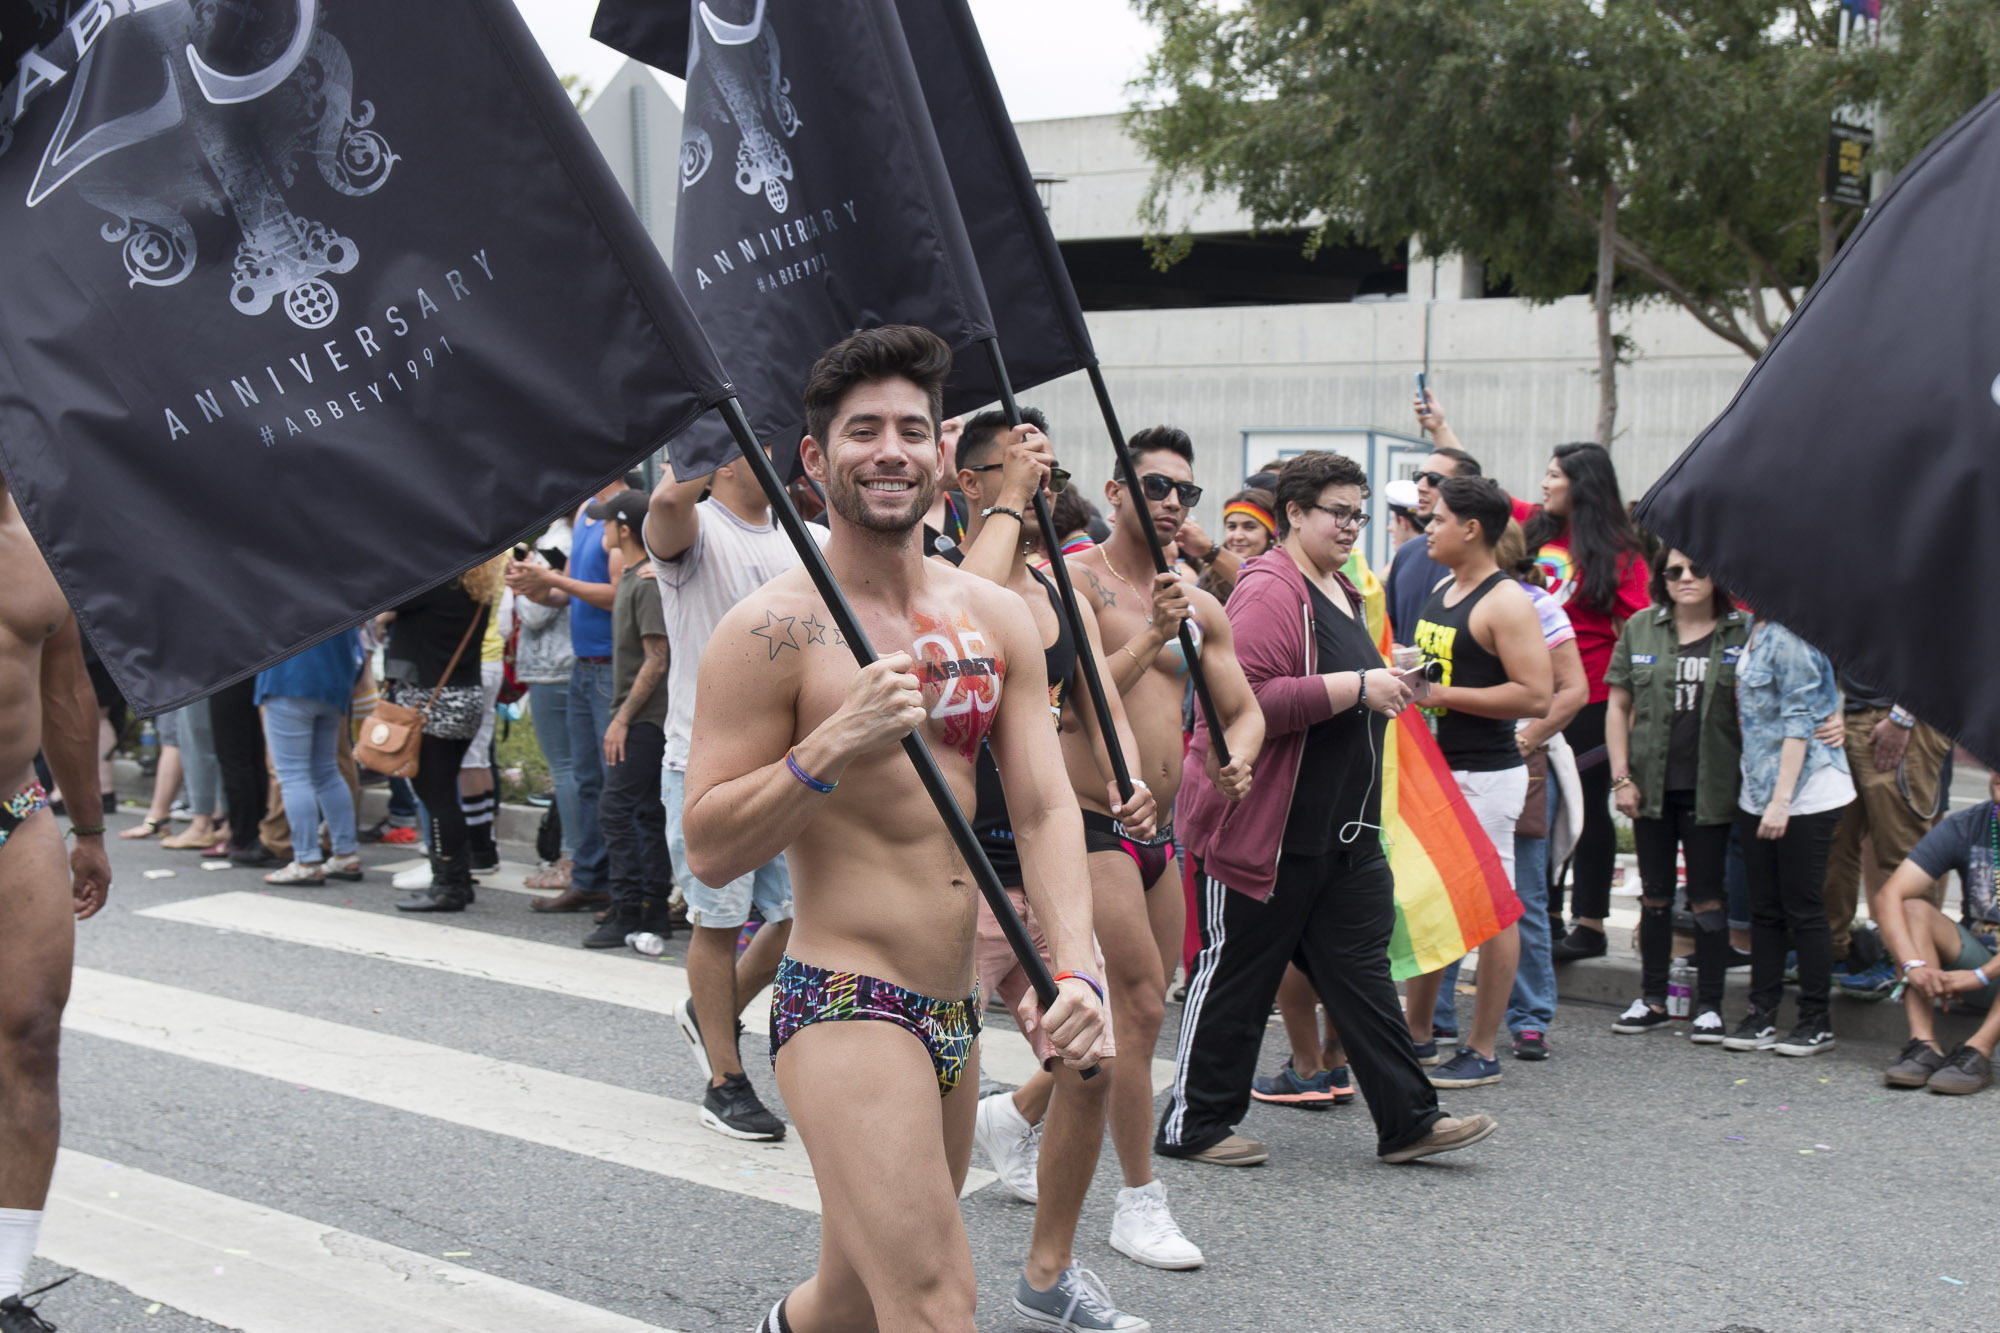 The Abbey celebrates LA Pride and its 25th anniversary. (Photo by Derek Wear of Unikorn Photography)